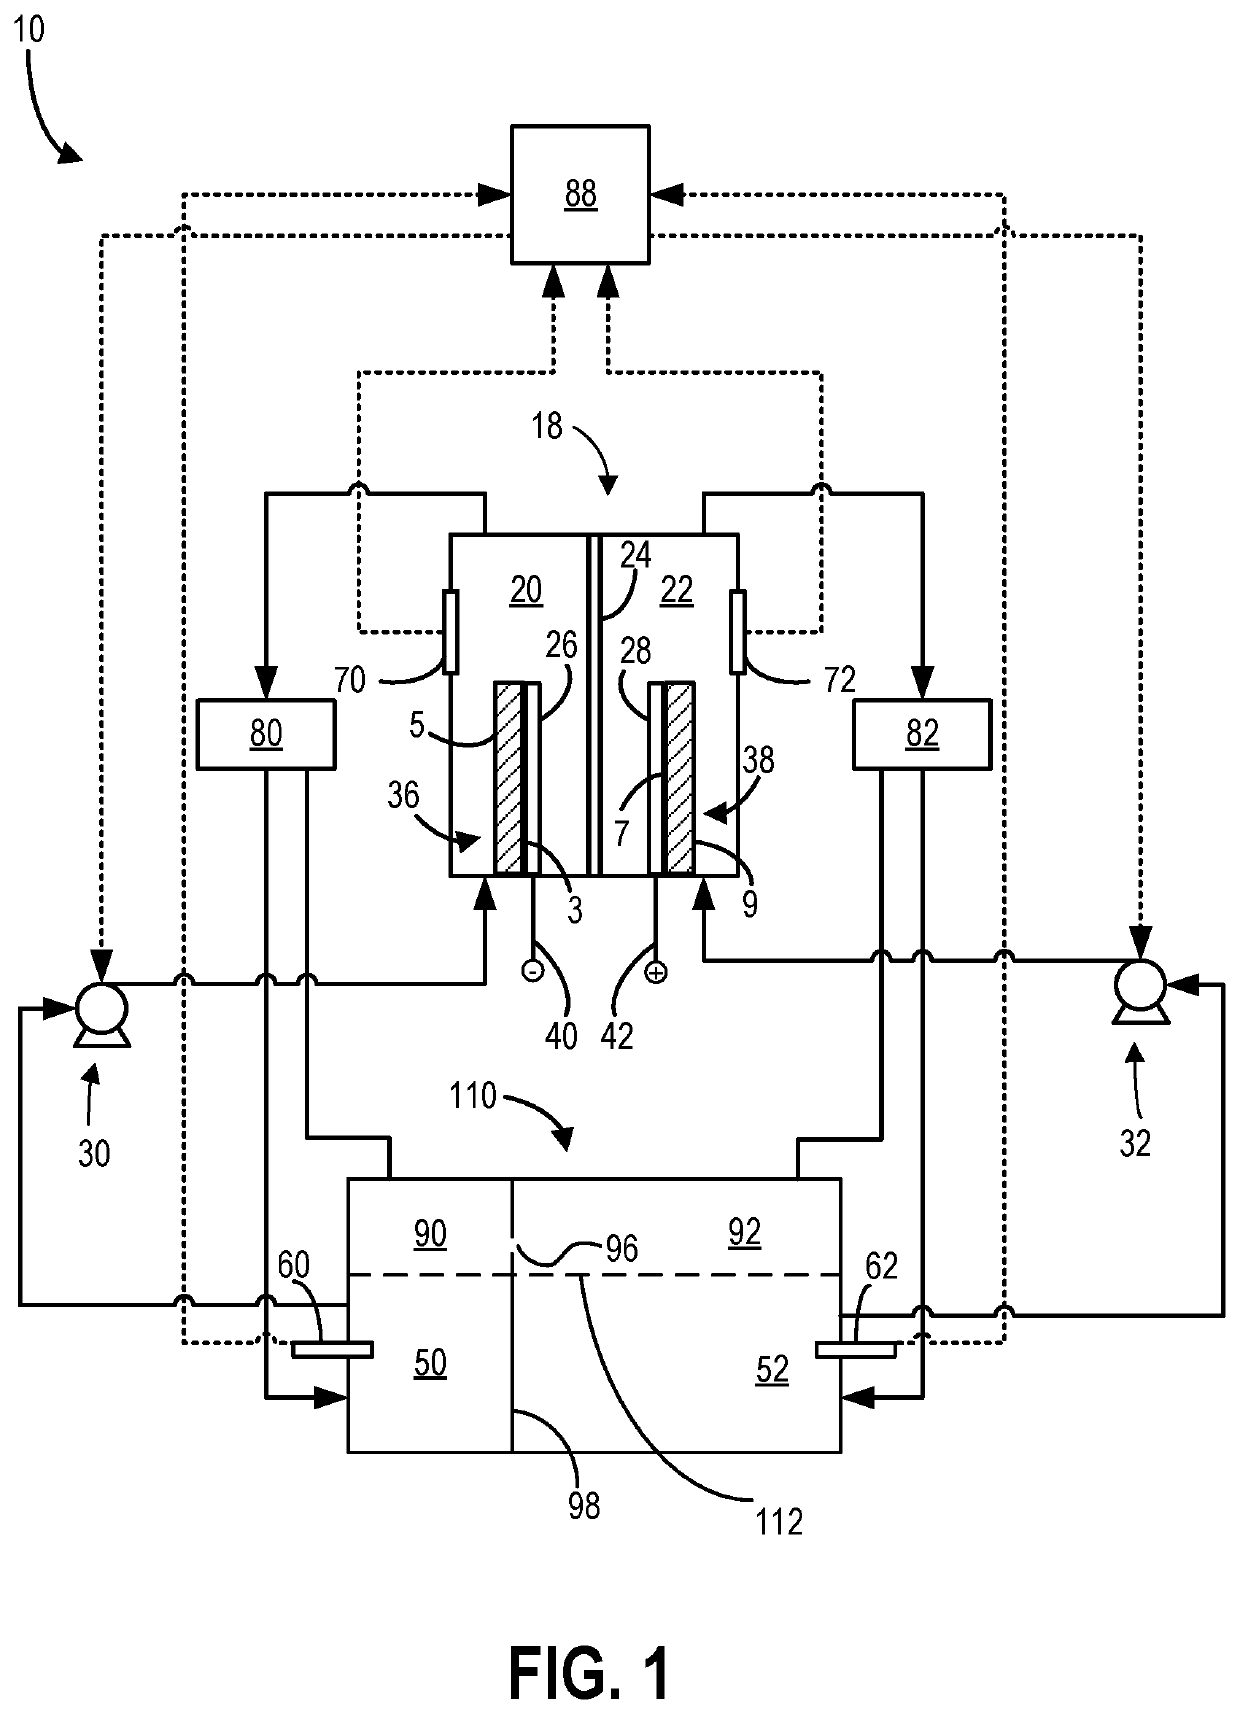 Methods and system for manufacturing a redfox flow battery system by roll-to-roll processing